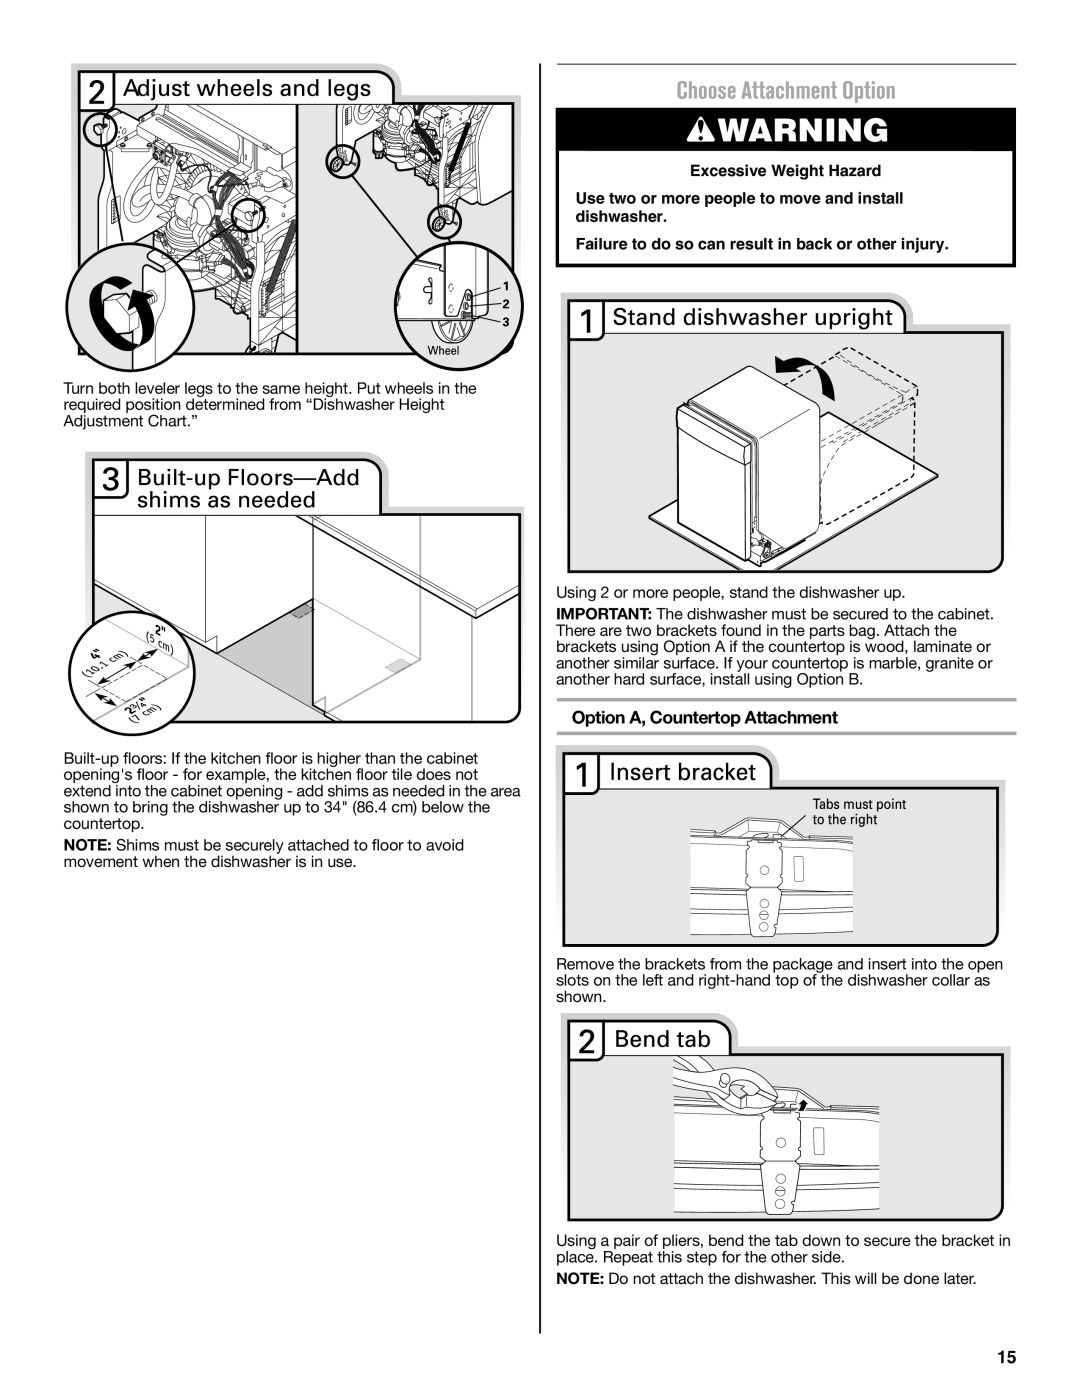 Maytag W10649077A installation instructions Choose Attachment Option, Option A, Countertop Attachment 